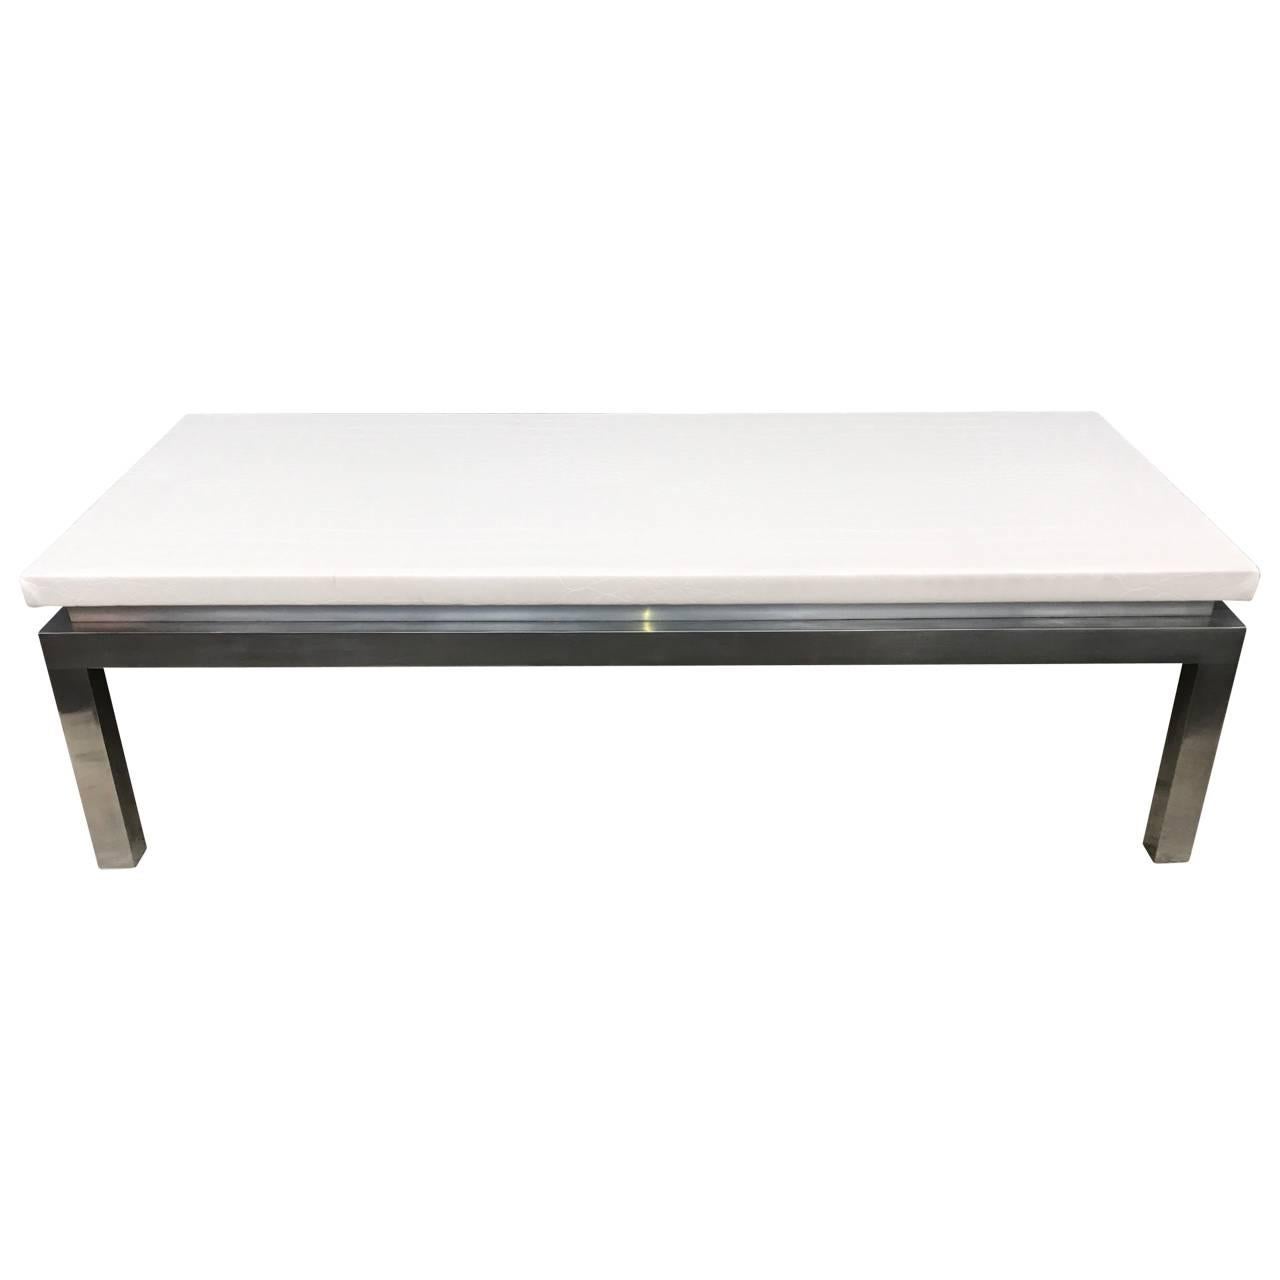 Solid stainless steel heavy two-piece base rectangular coffee table with thick white faux leather top.